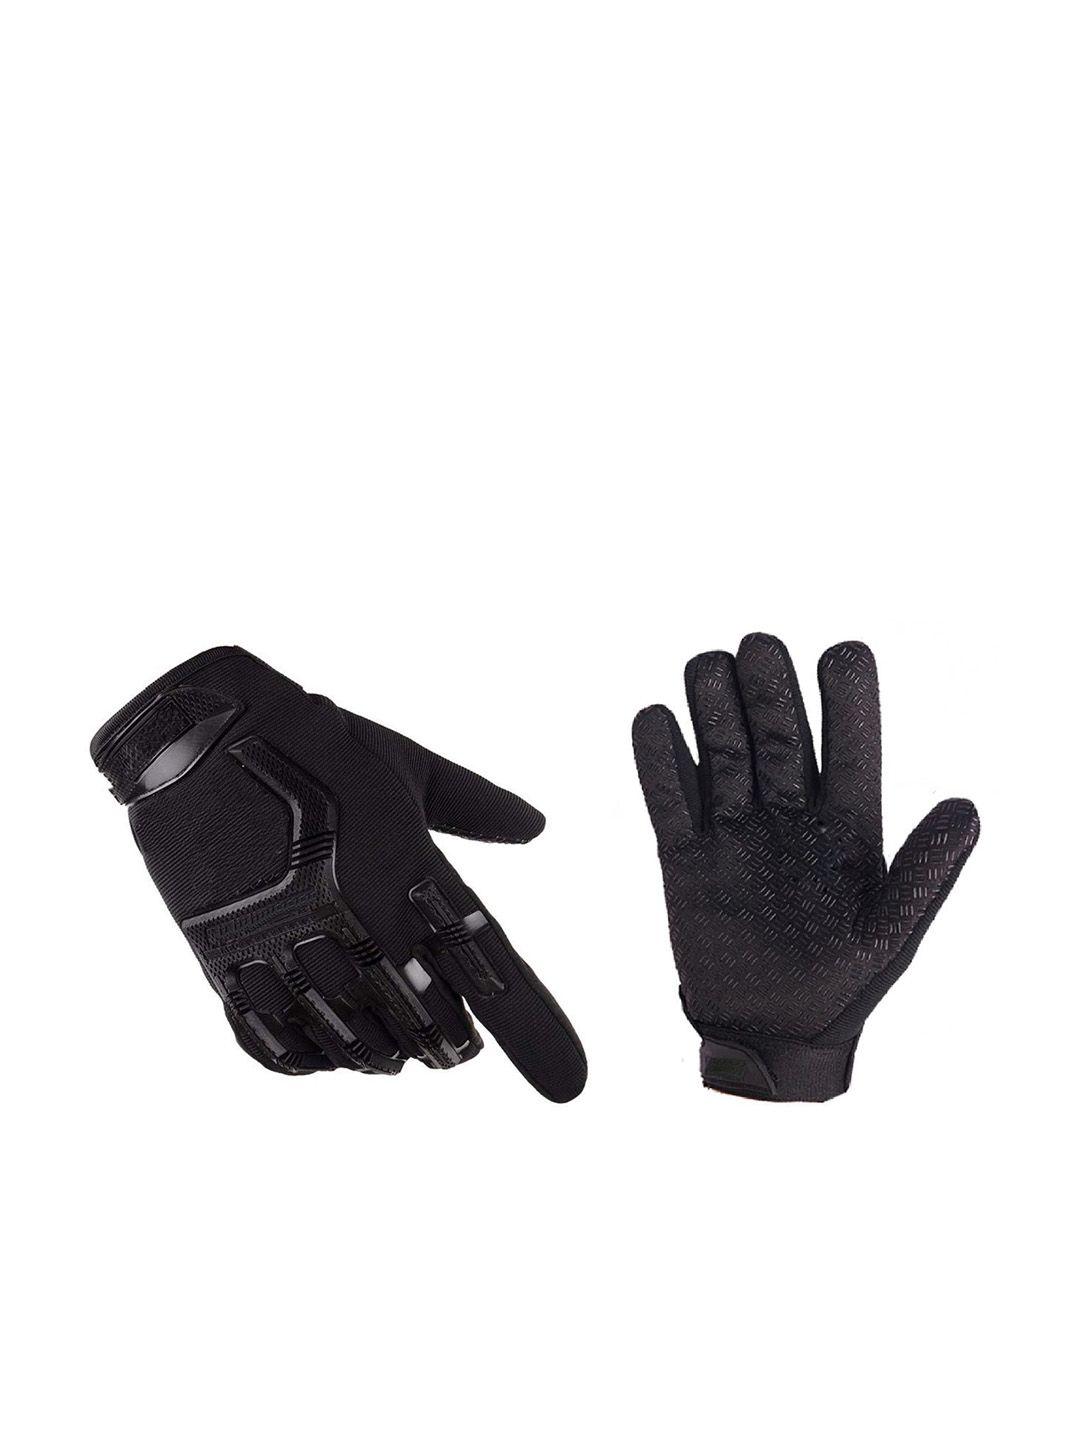 alexvyan textured anti-skid snuggly-fit full finger sports gloves